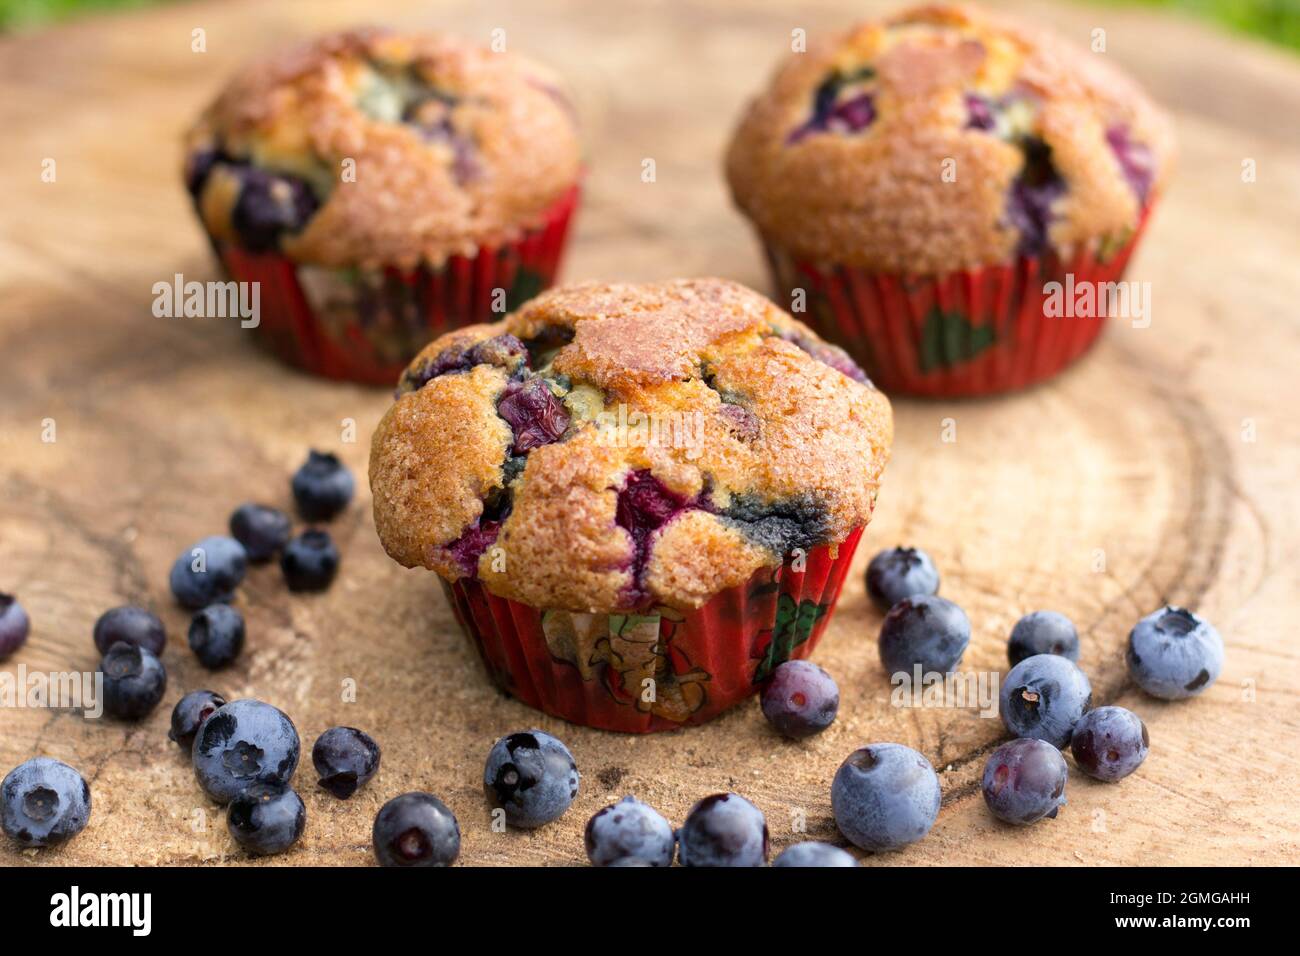 Blueberry Muffins on hard wooden board with fresh blueberries Stock Photo